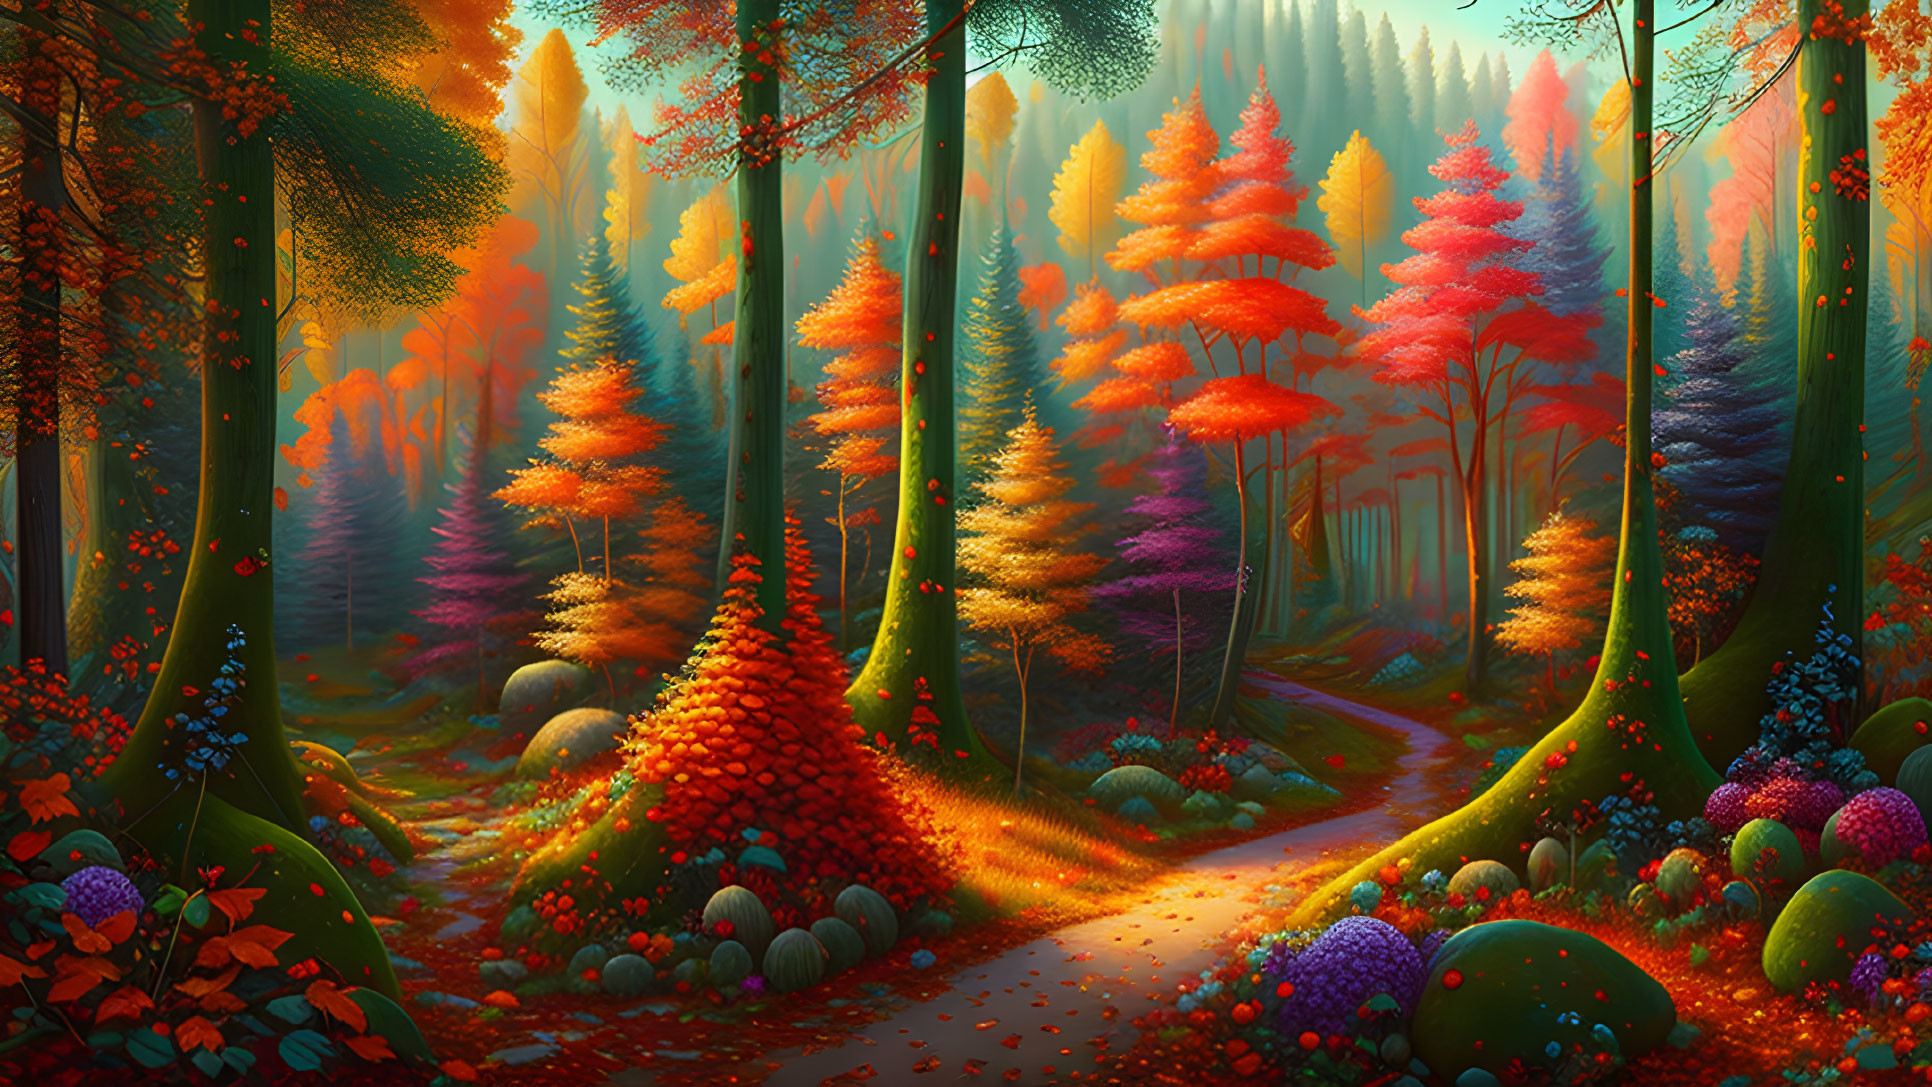 Colorful Autumn Forest with Sunlight Filtering Through Canopy